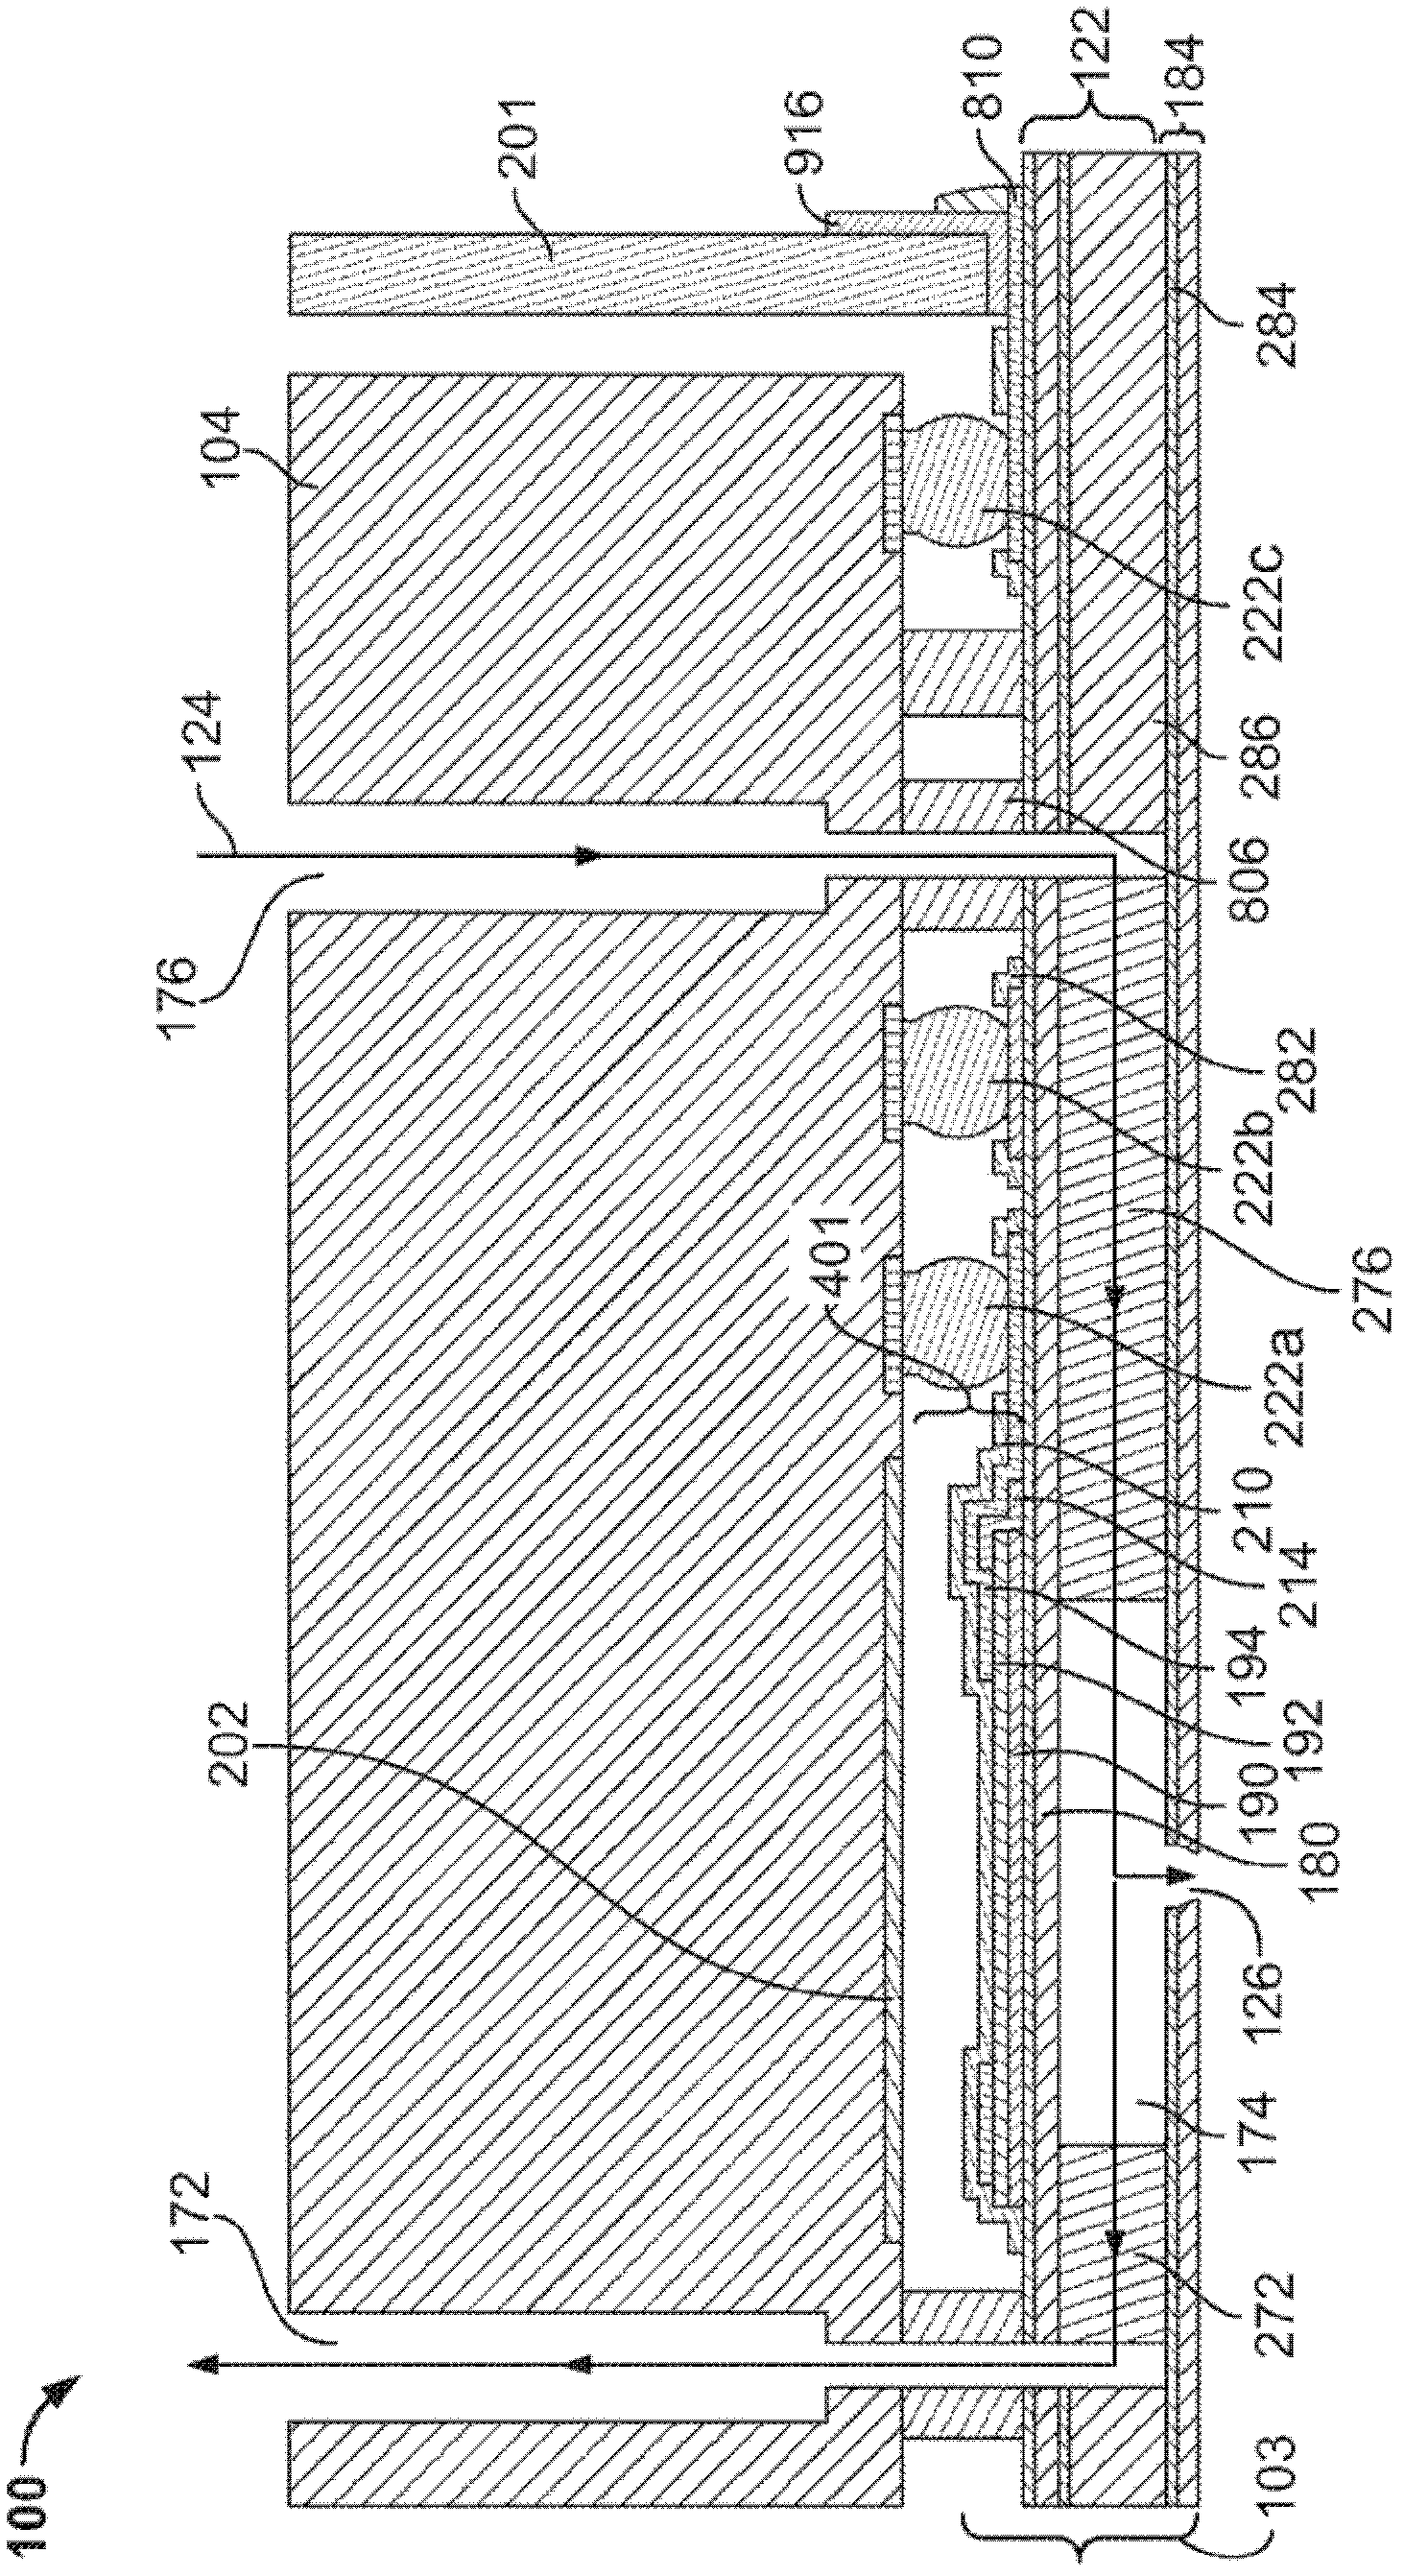 Mems Jetting Structure For Dense Packing